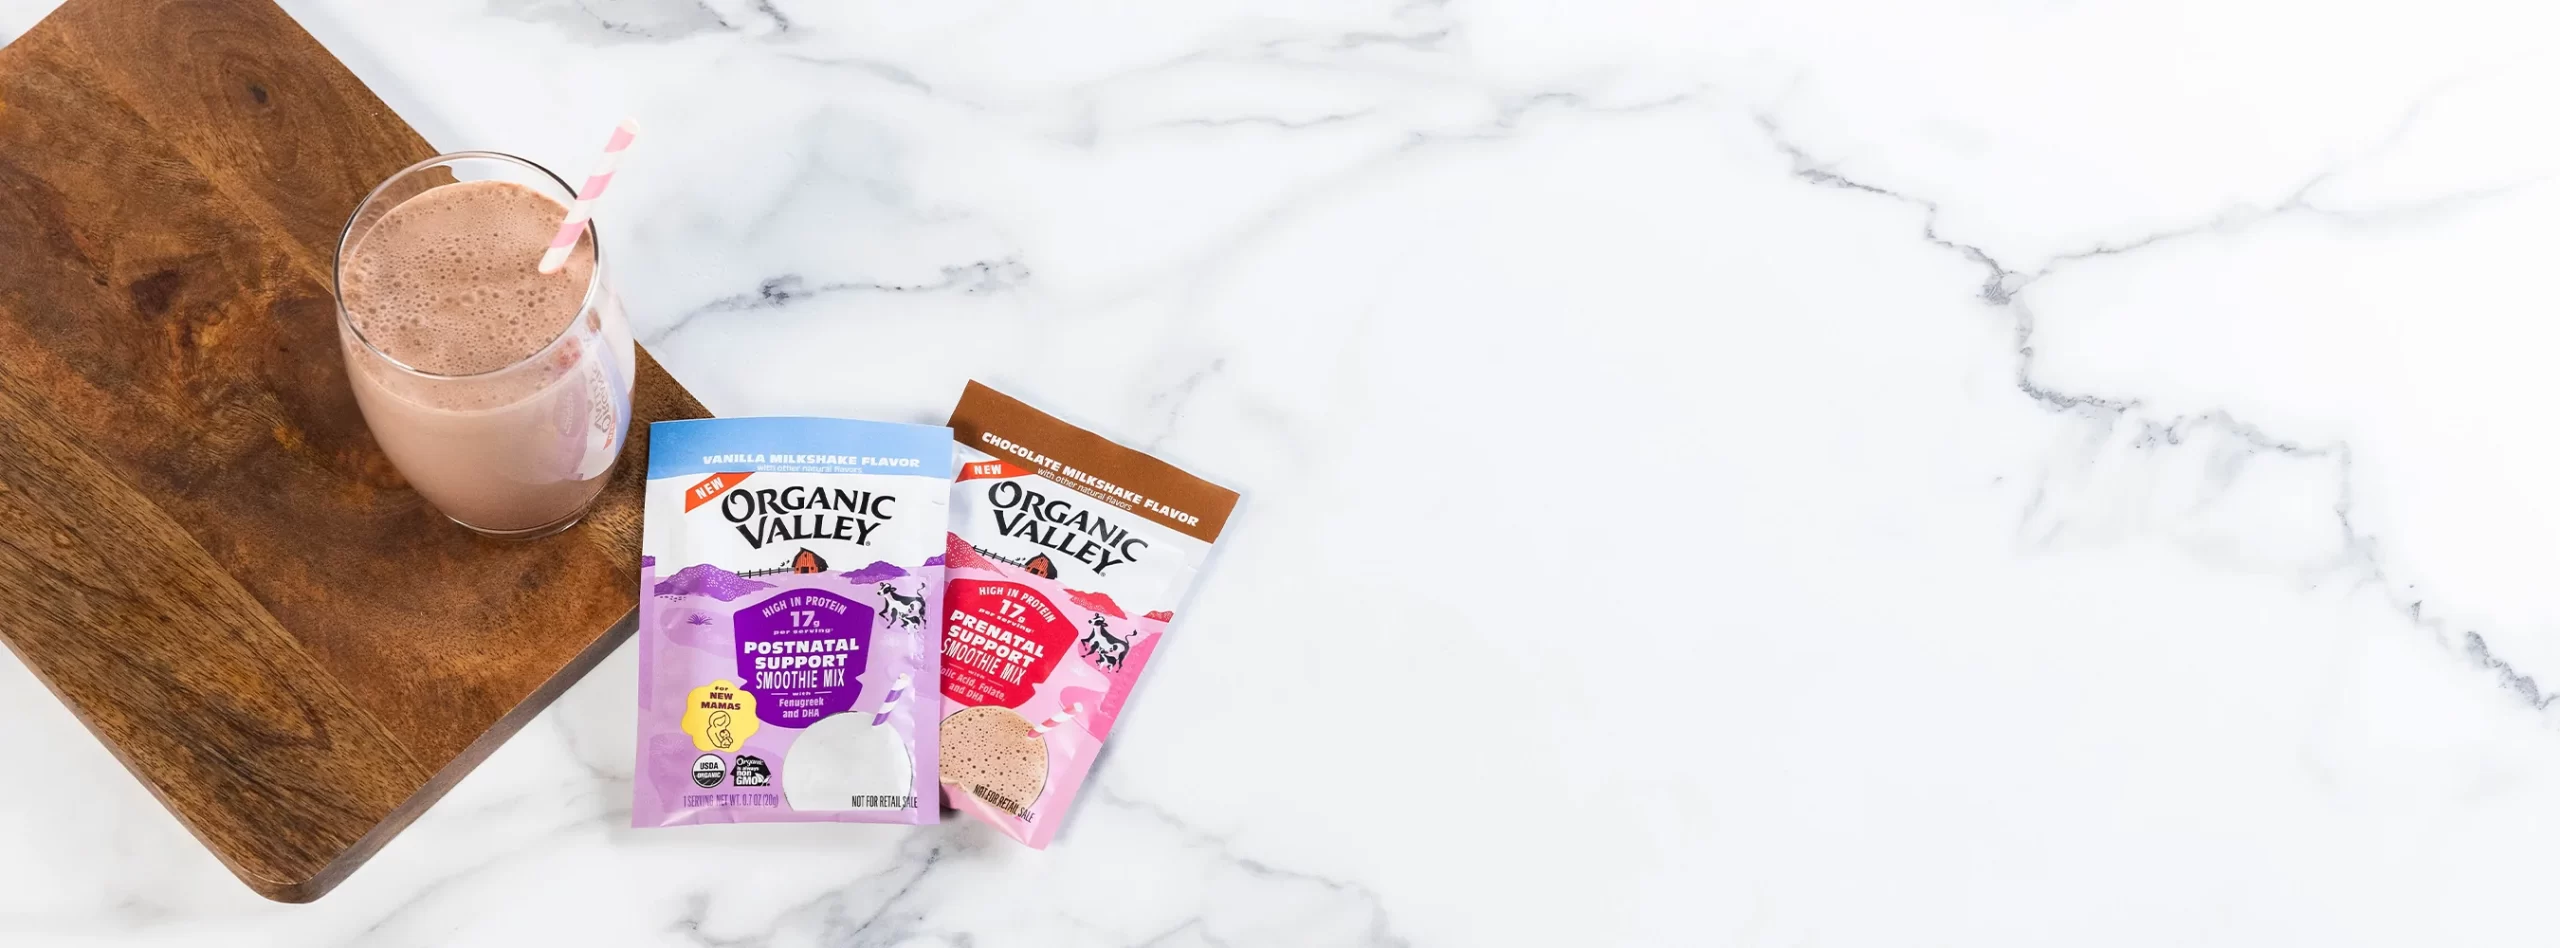 Organic Valley Goodness In Every Scoop Instant Win Sweepstakes (1,000 Winners)